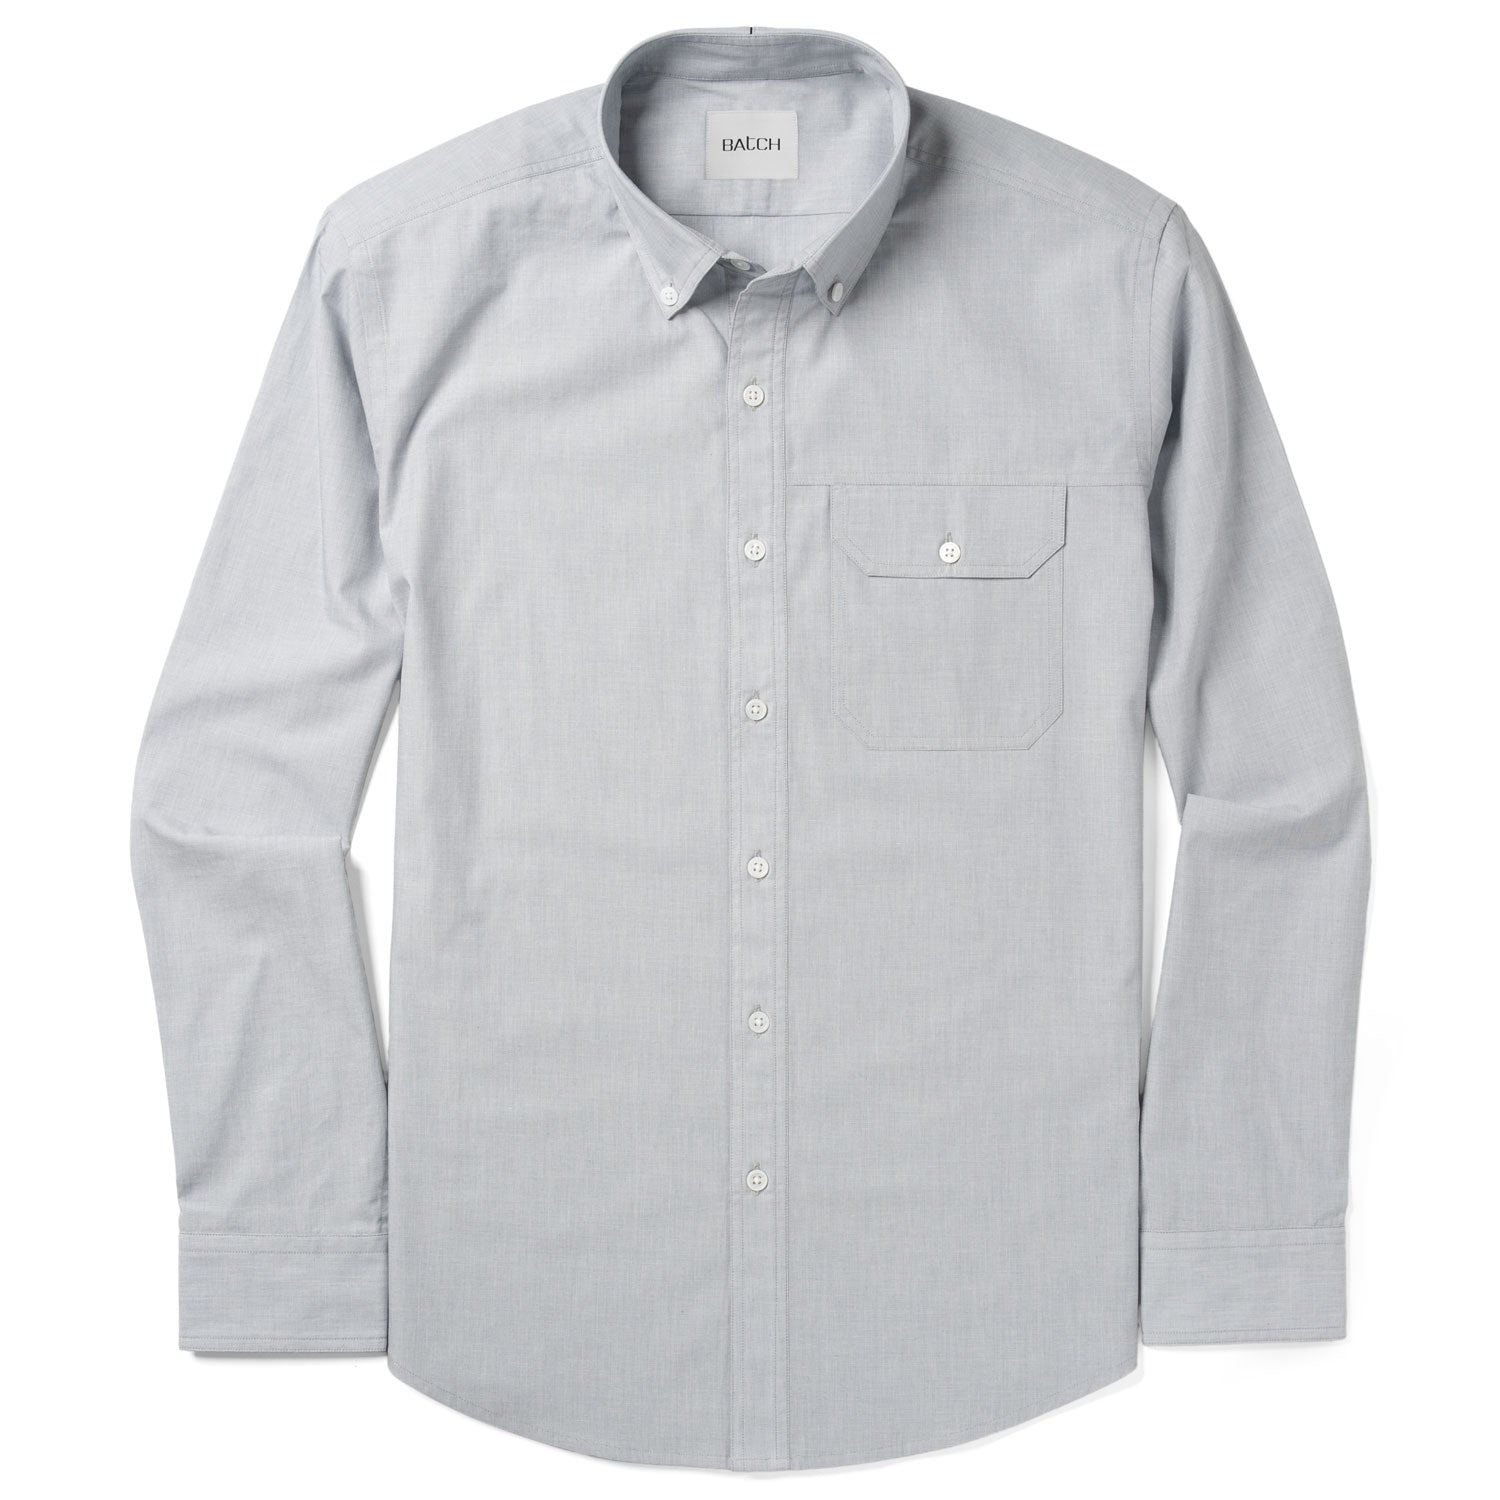 Builder Casual Shirt – Aluminum Gray Cotton End-on-end